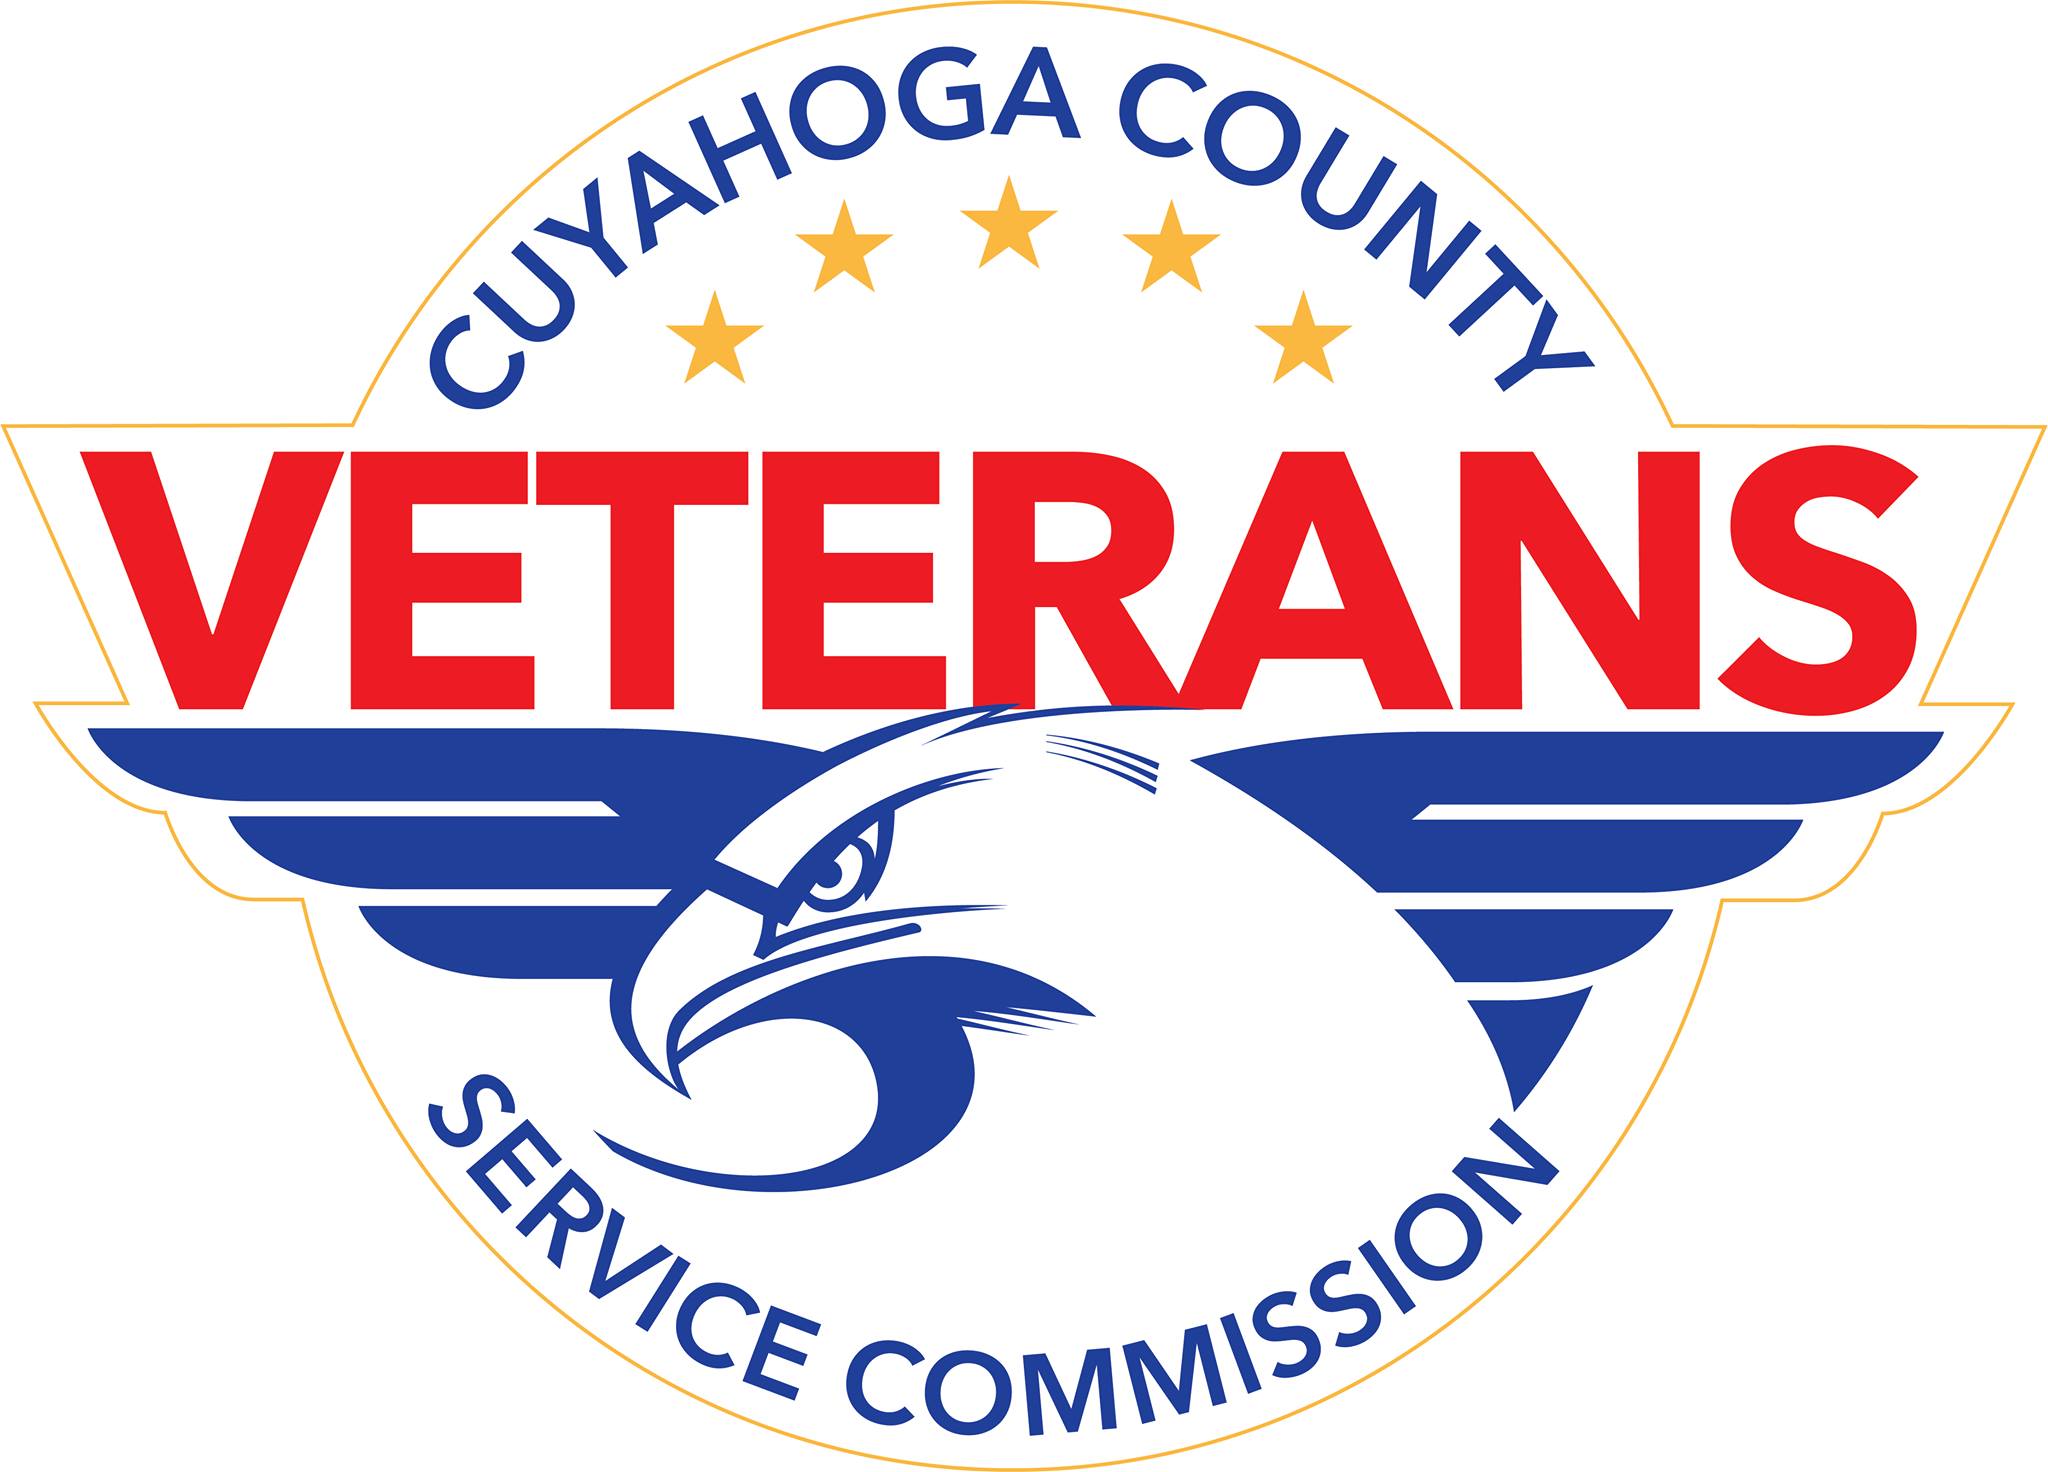 Veterans service commission - cuyahoga county